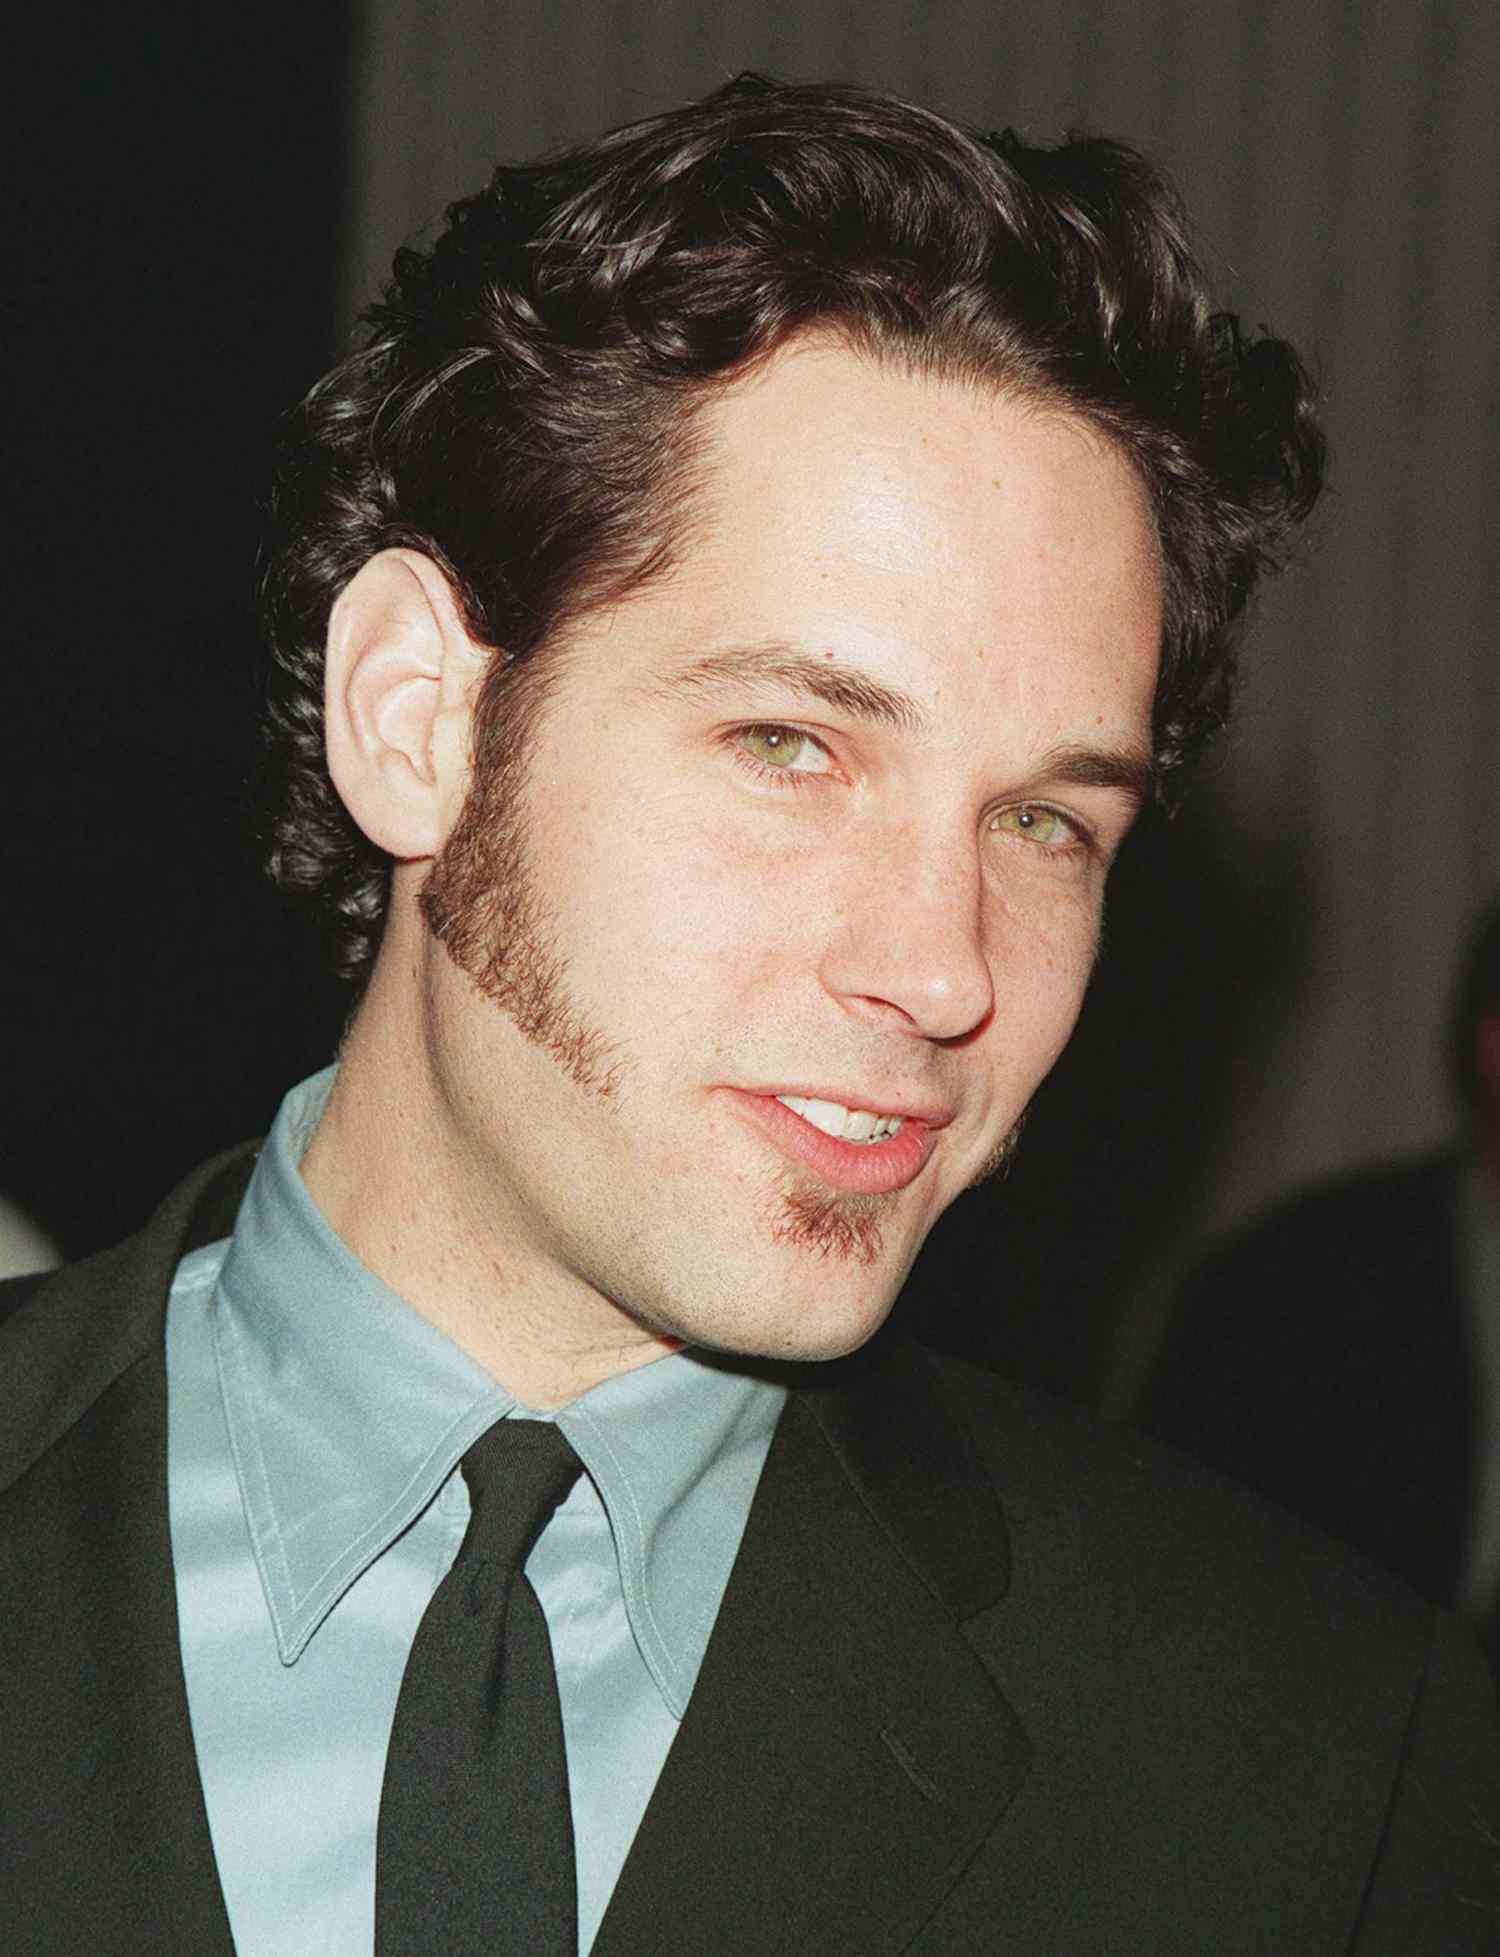 (Original Caption) Paul Rudd, co-star of the film, arrives at the Avco Cinema. (Photo by Frank Trapper/Corbis via Getty Images)